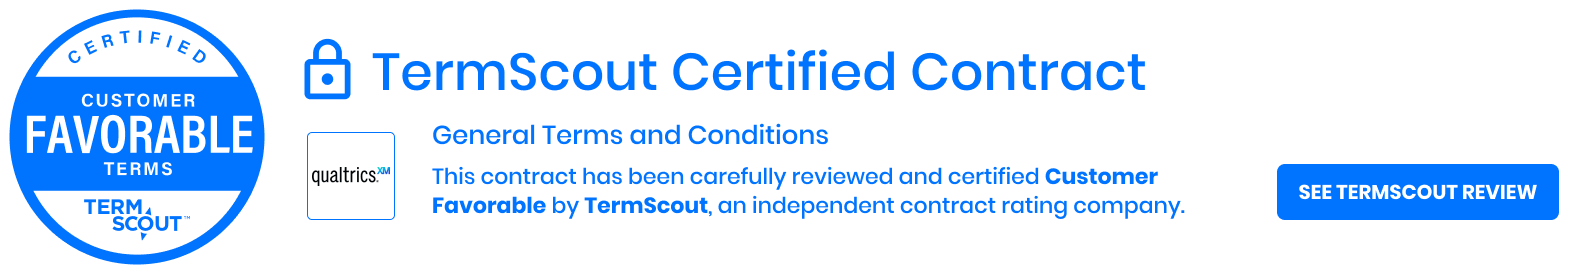 TermScout Certified Contract